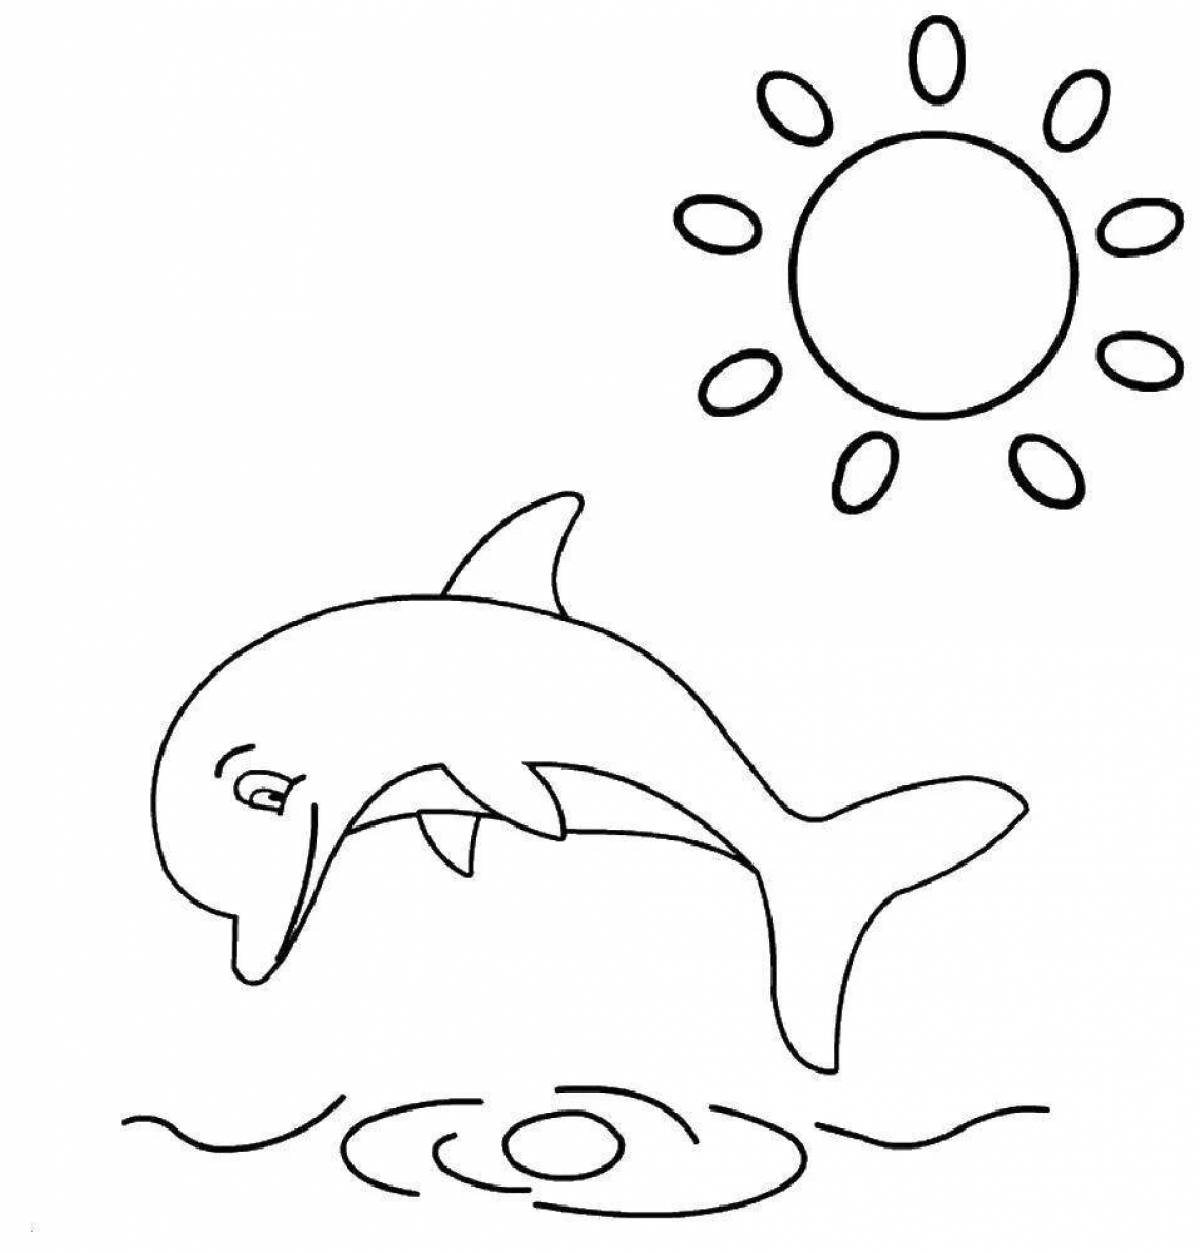 Transcendental dolphin coloring page